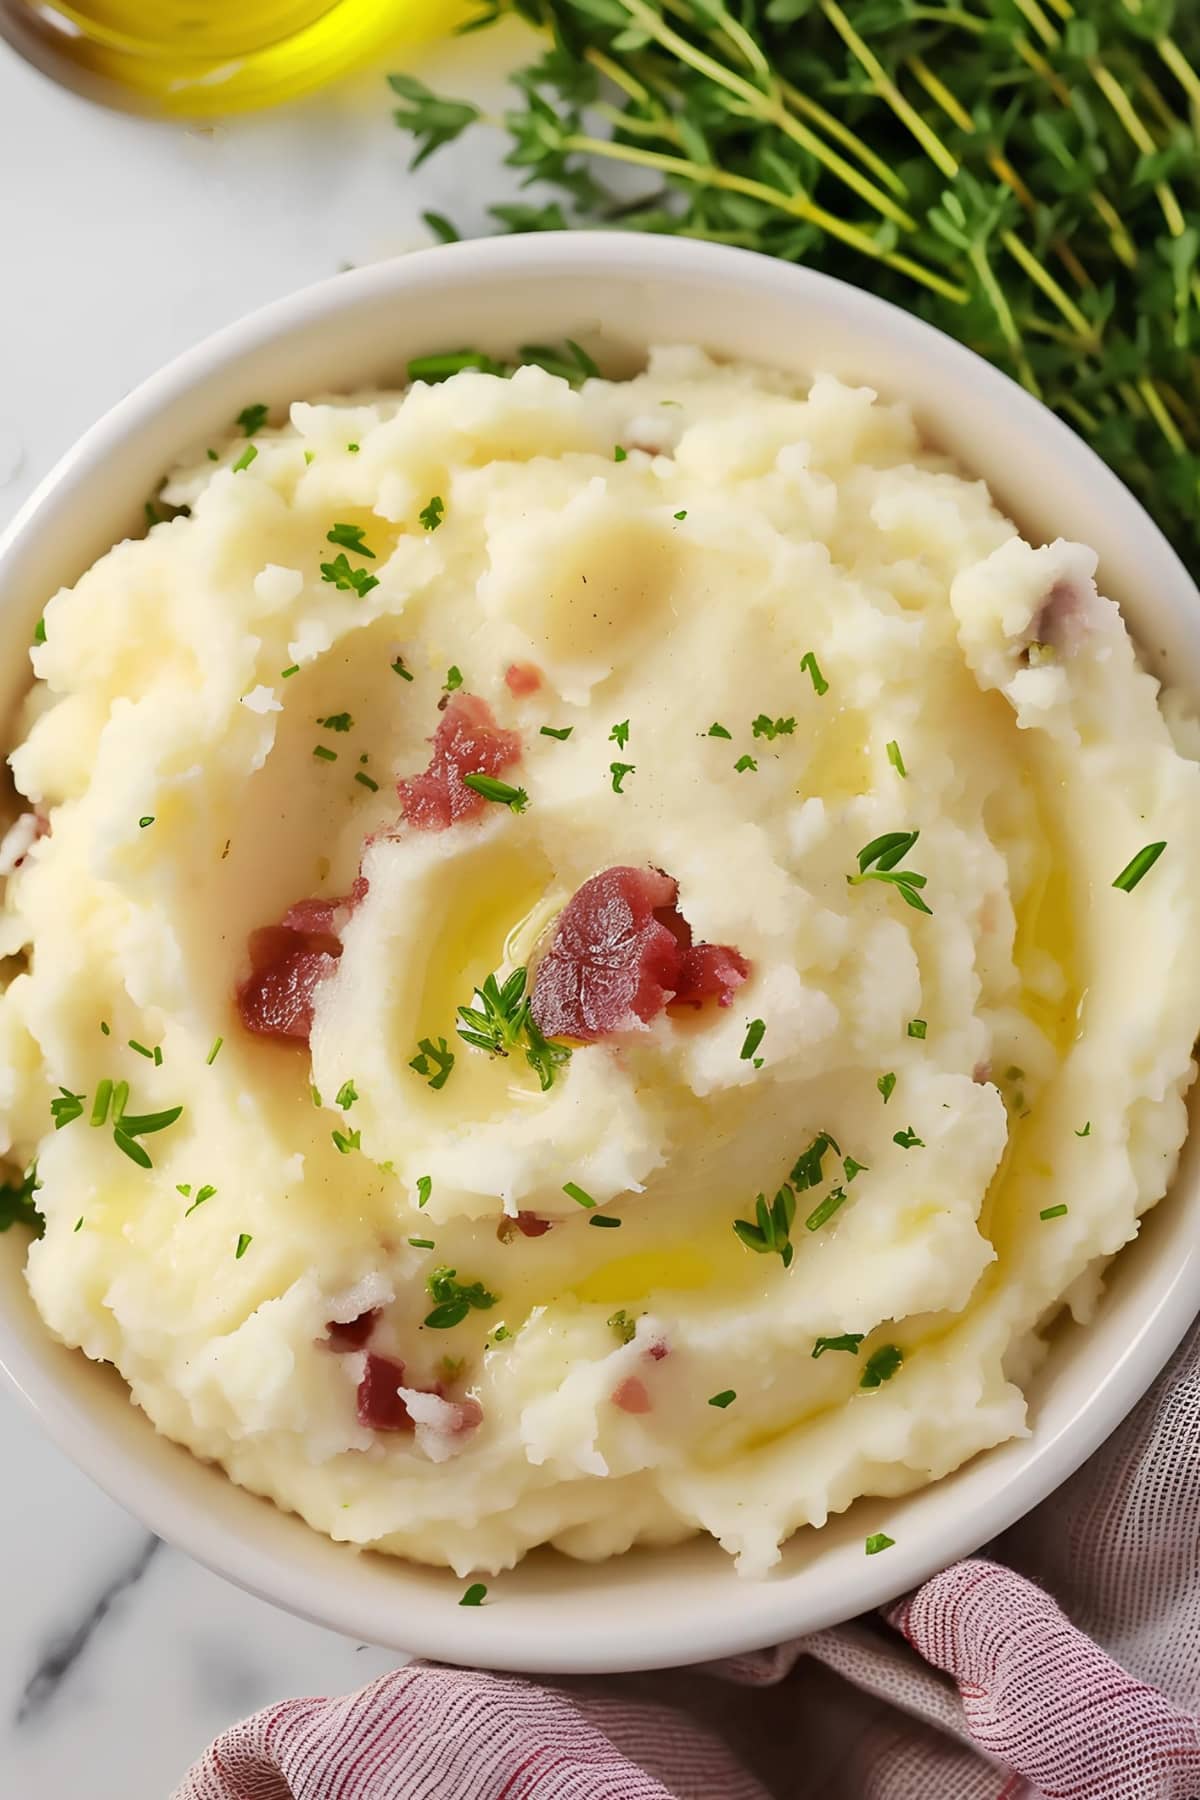 Mashed red potatoes with ham and herbs, top view